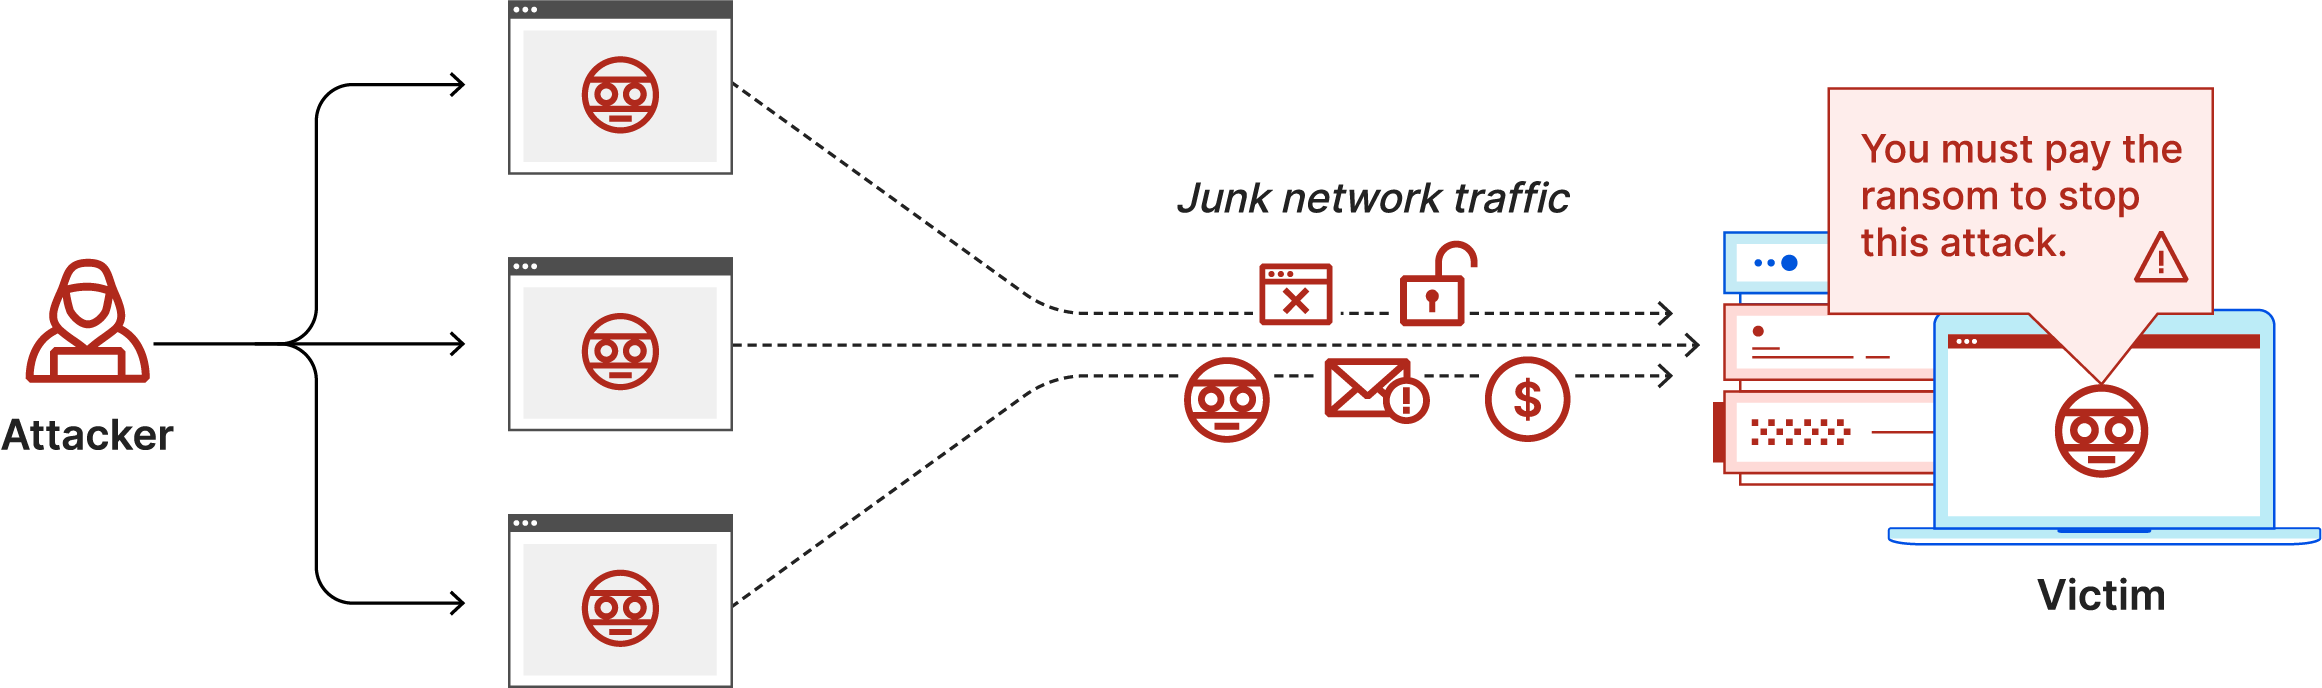 Ransom DDoS attack diagram: Attacker sends junk network traffic and ransom note to victim